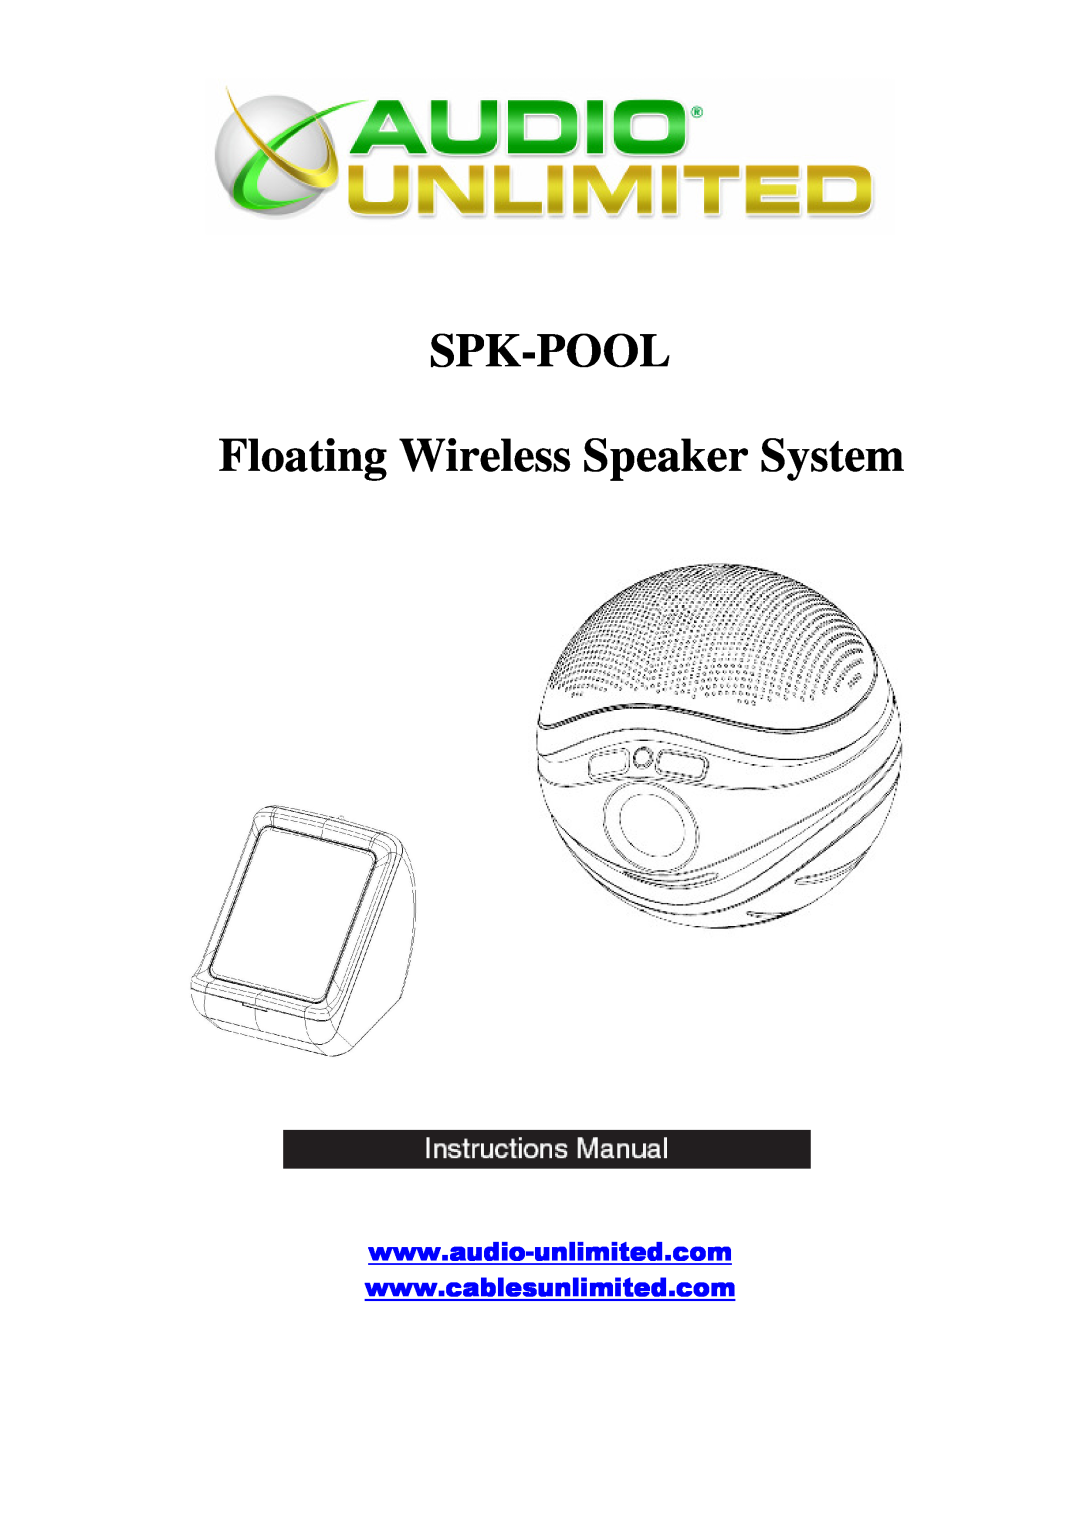 Cables Unlimited manual SPK-POOL Floating Wireless Speaker System 